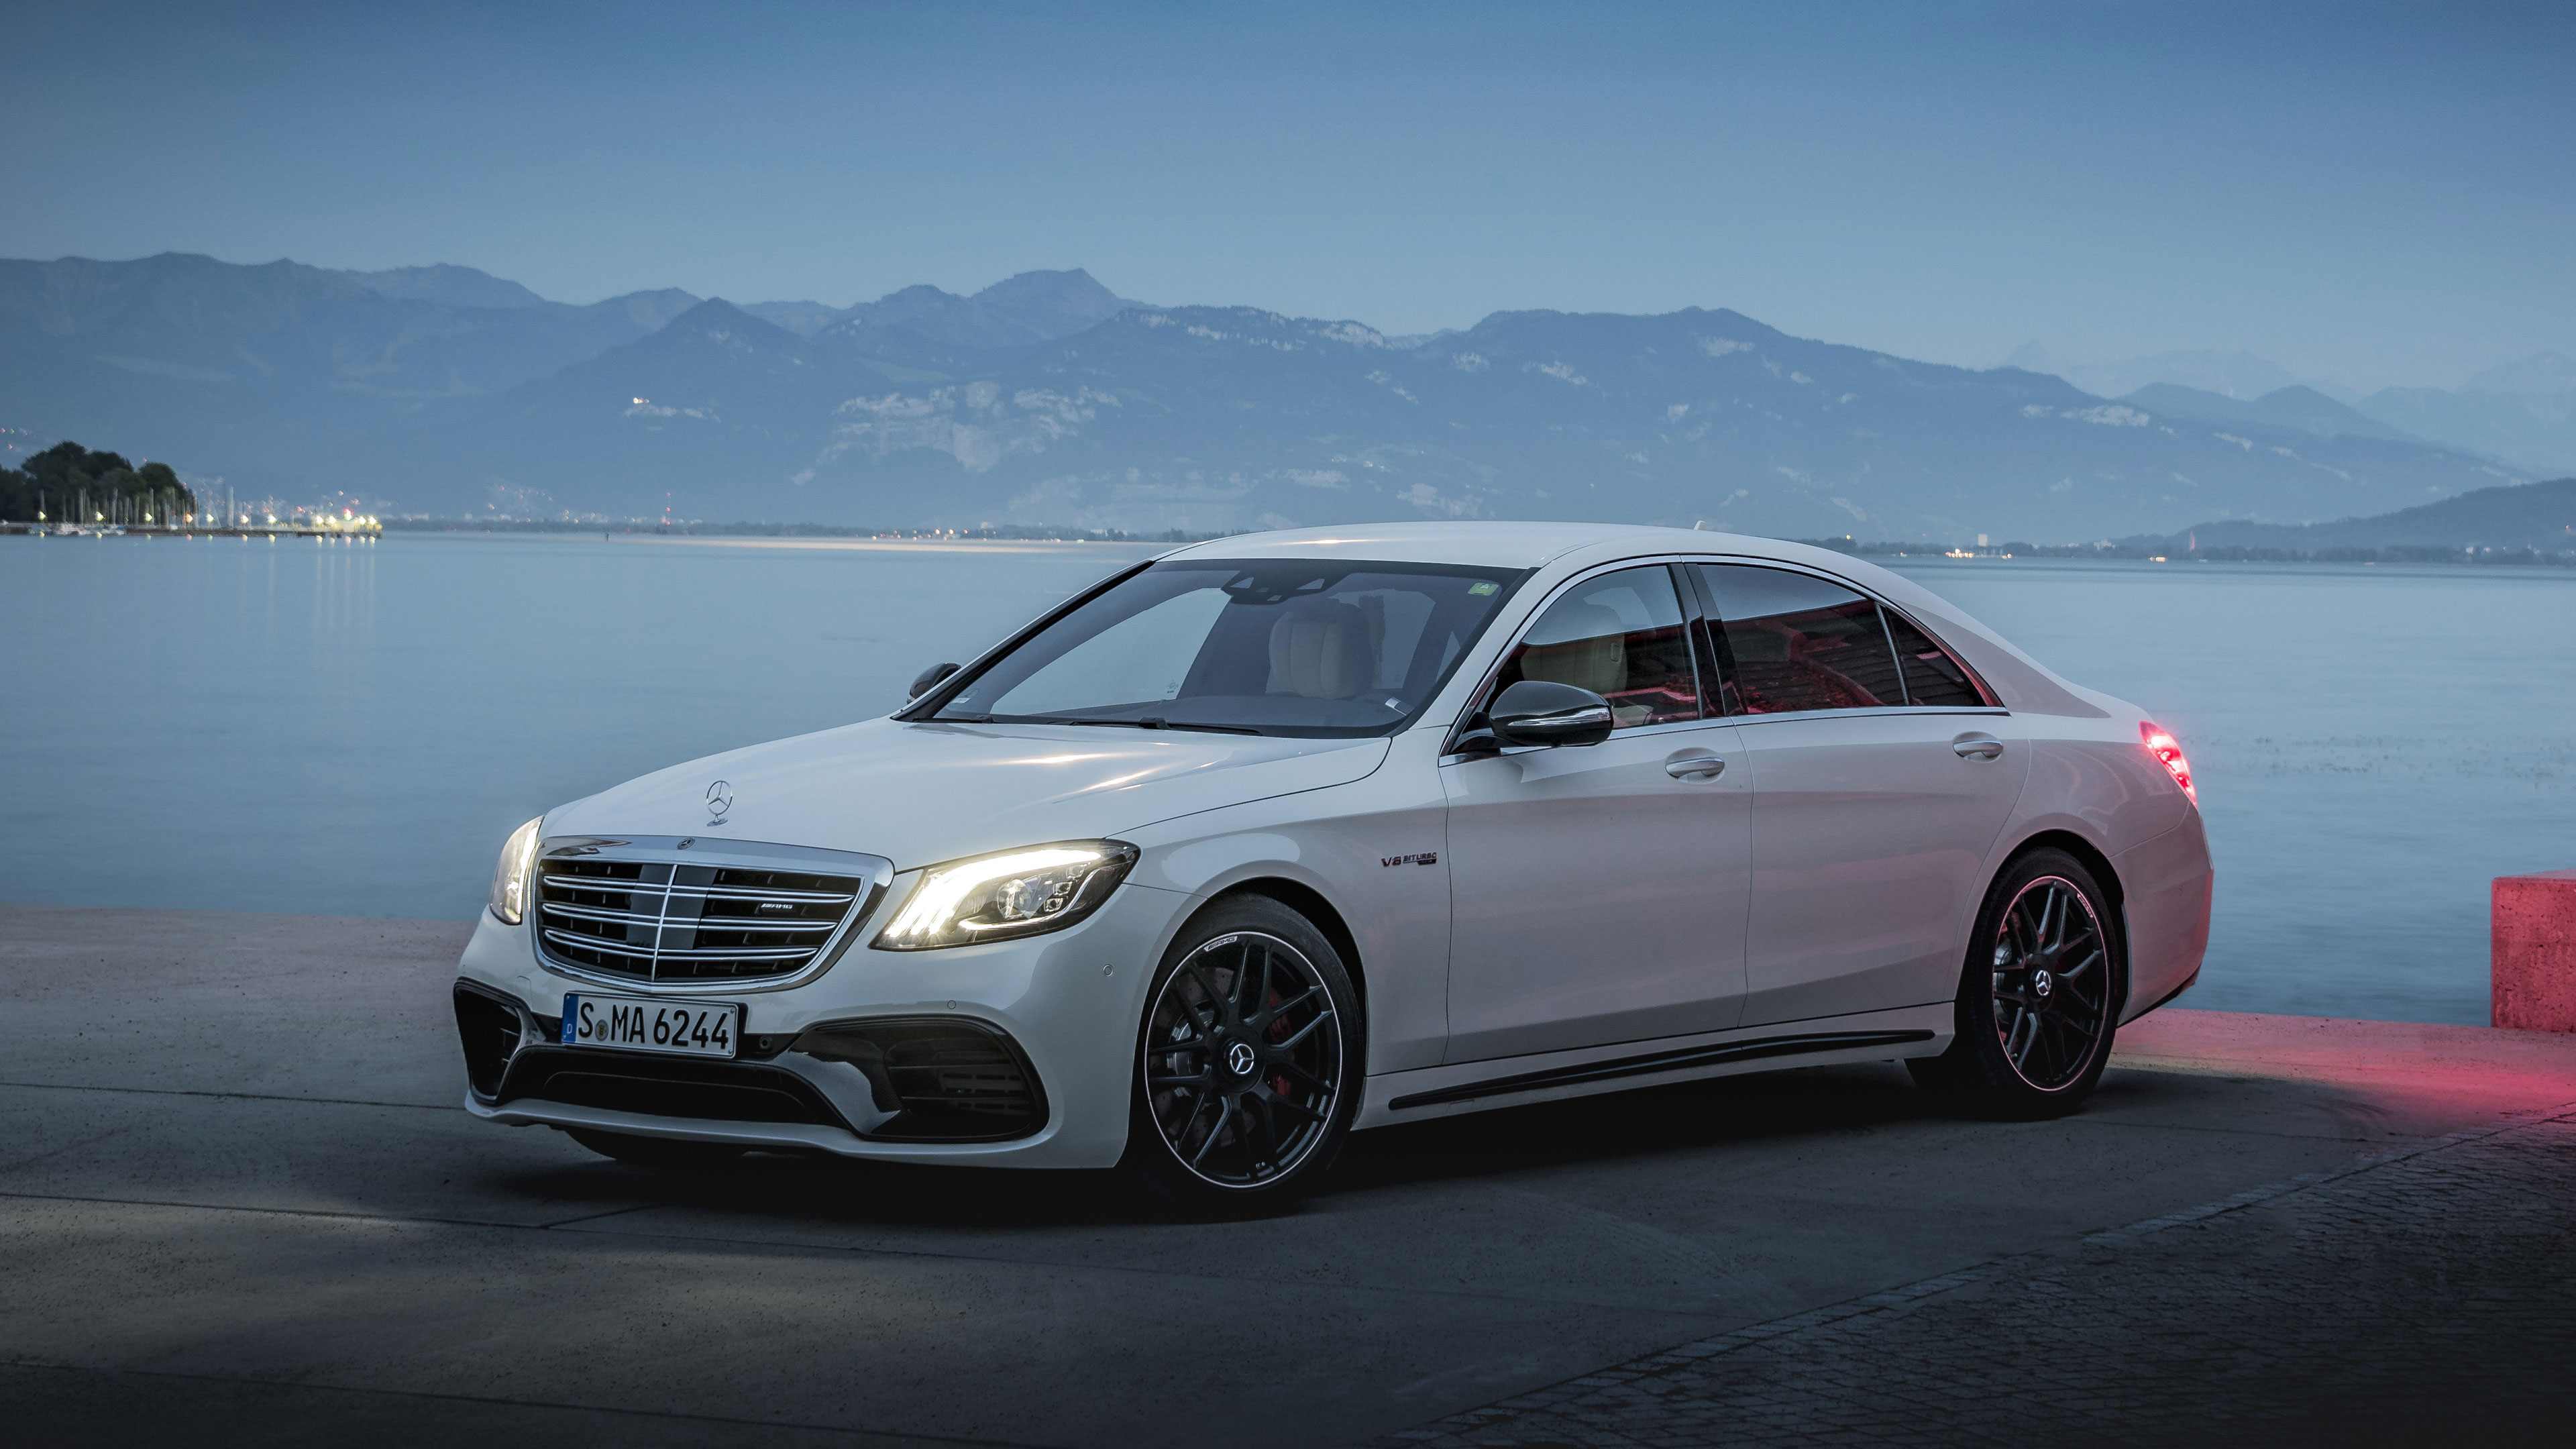 S класс amg. Mercedes Benz s63 AMG. Mercedes Benz s class AMG 63. Мерседес е63 АМГ 222. Mercedes s class s63 AMG.